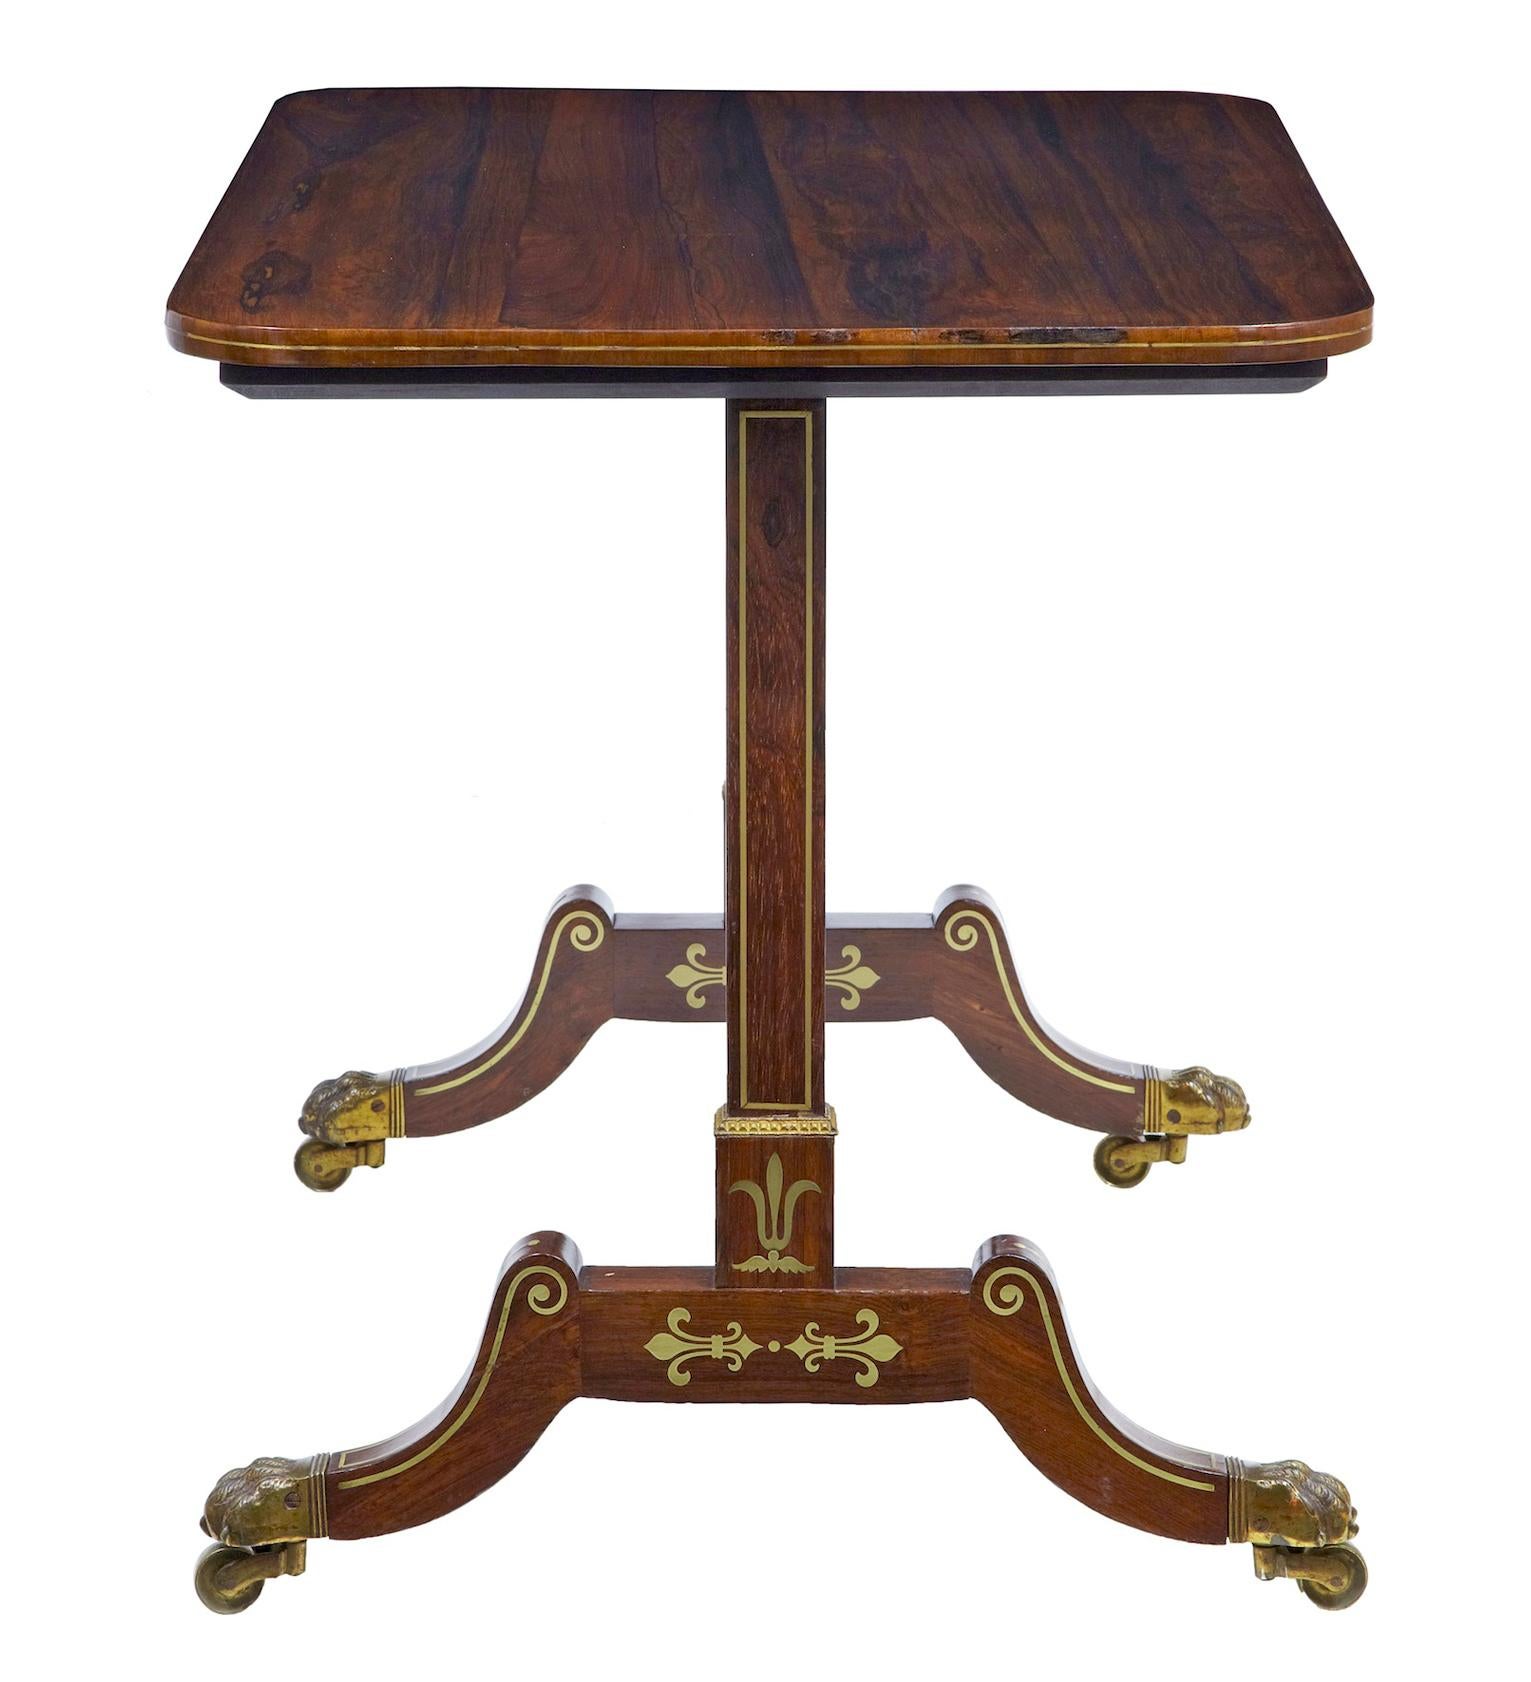 Regency period brass inlaid palisander occasional side table, circa 1820.

Top quality table in good condition. Ideal for use as a side or sofa table.

Rectangular top with rounded edge with brass stringing detail. Straight supports with inlaid